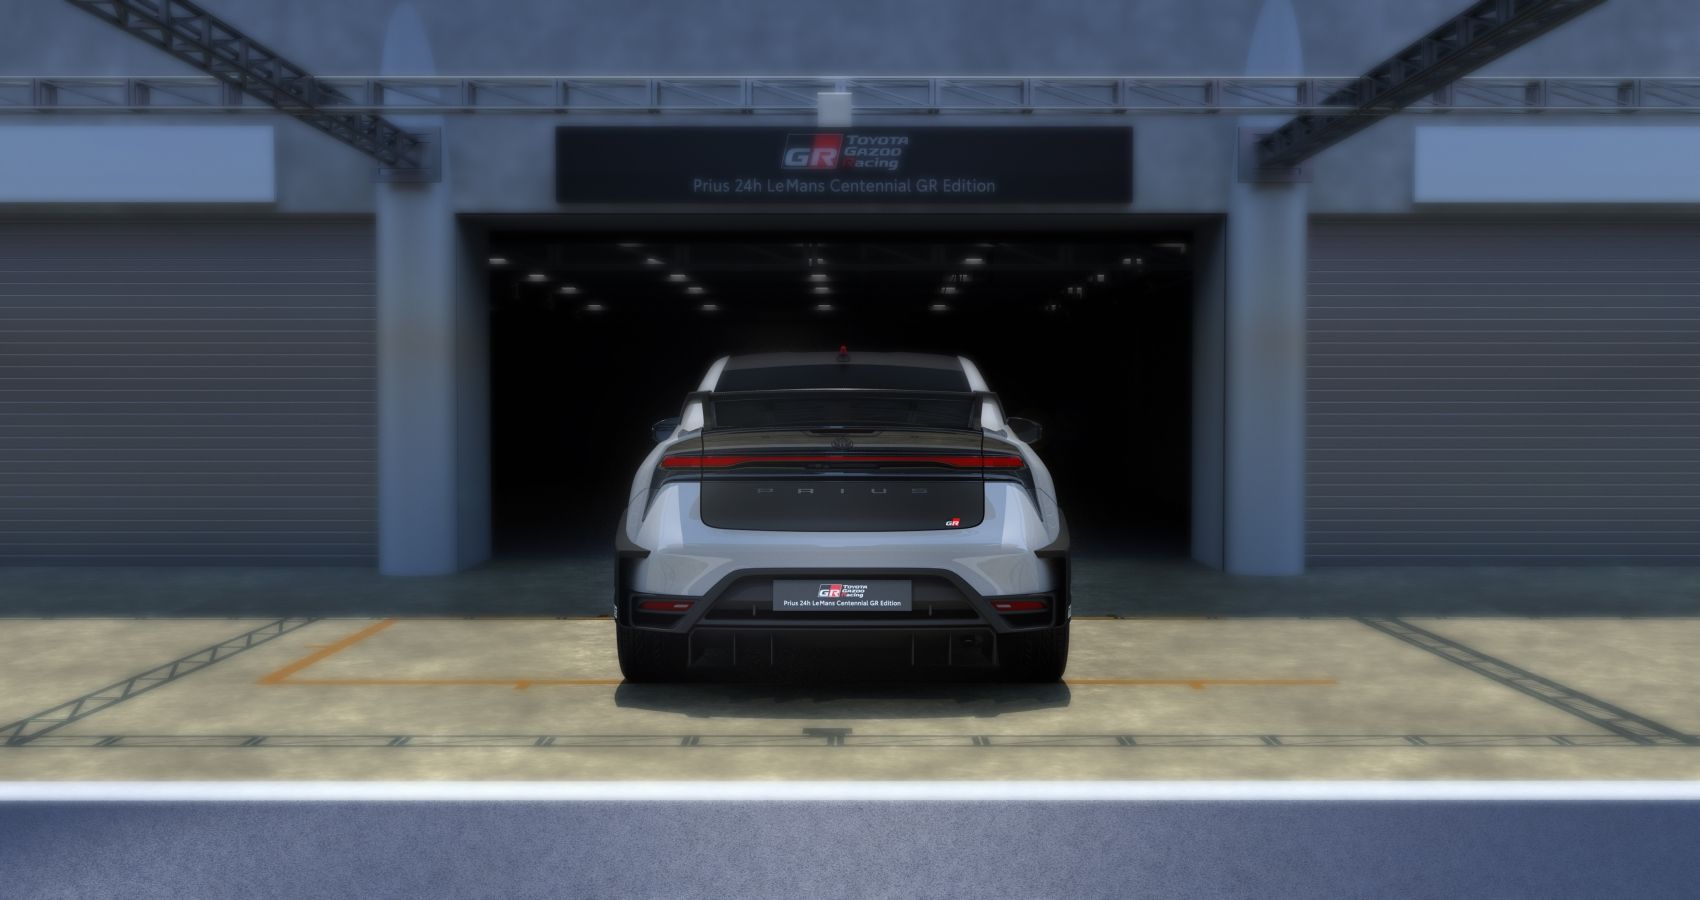 Rear view of the 2023 Toyota Prius Gazoo Racing Le Mans